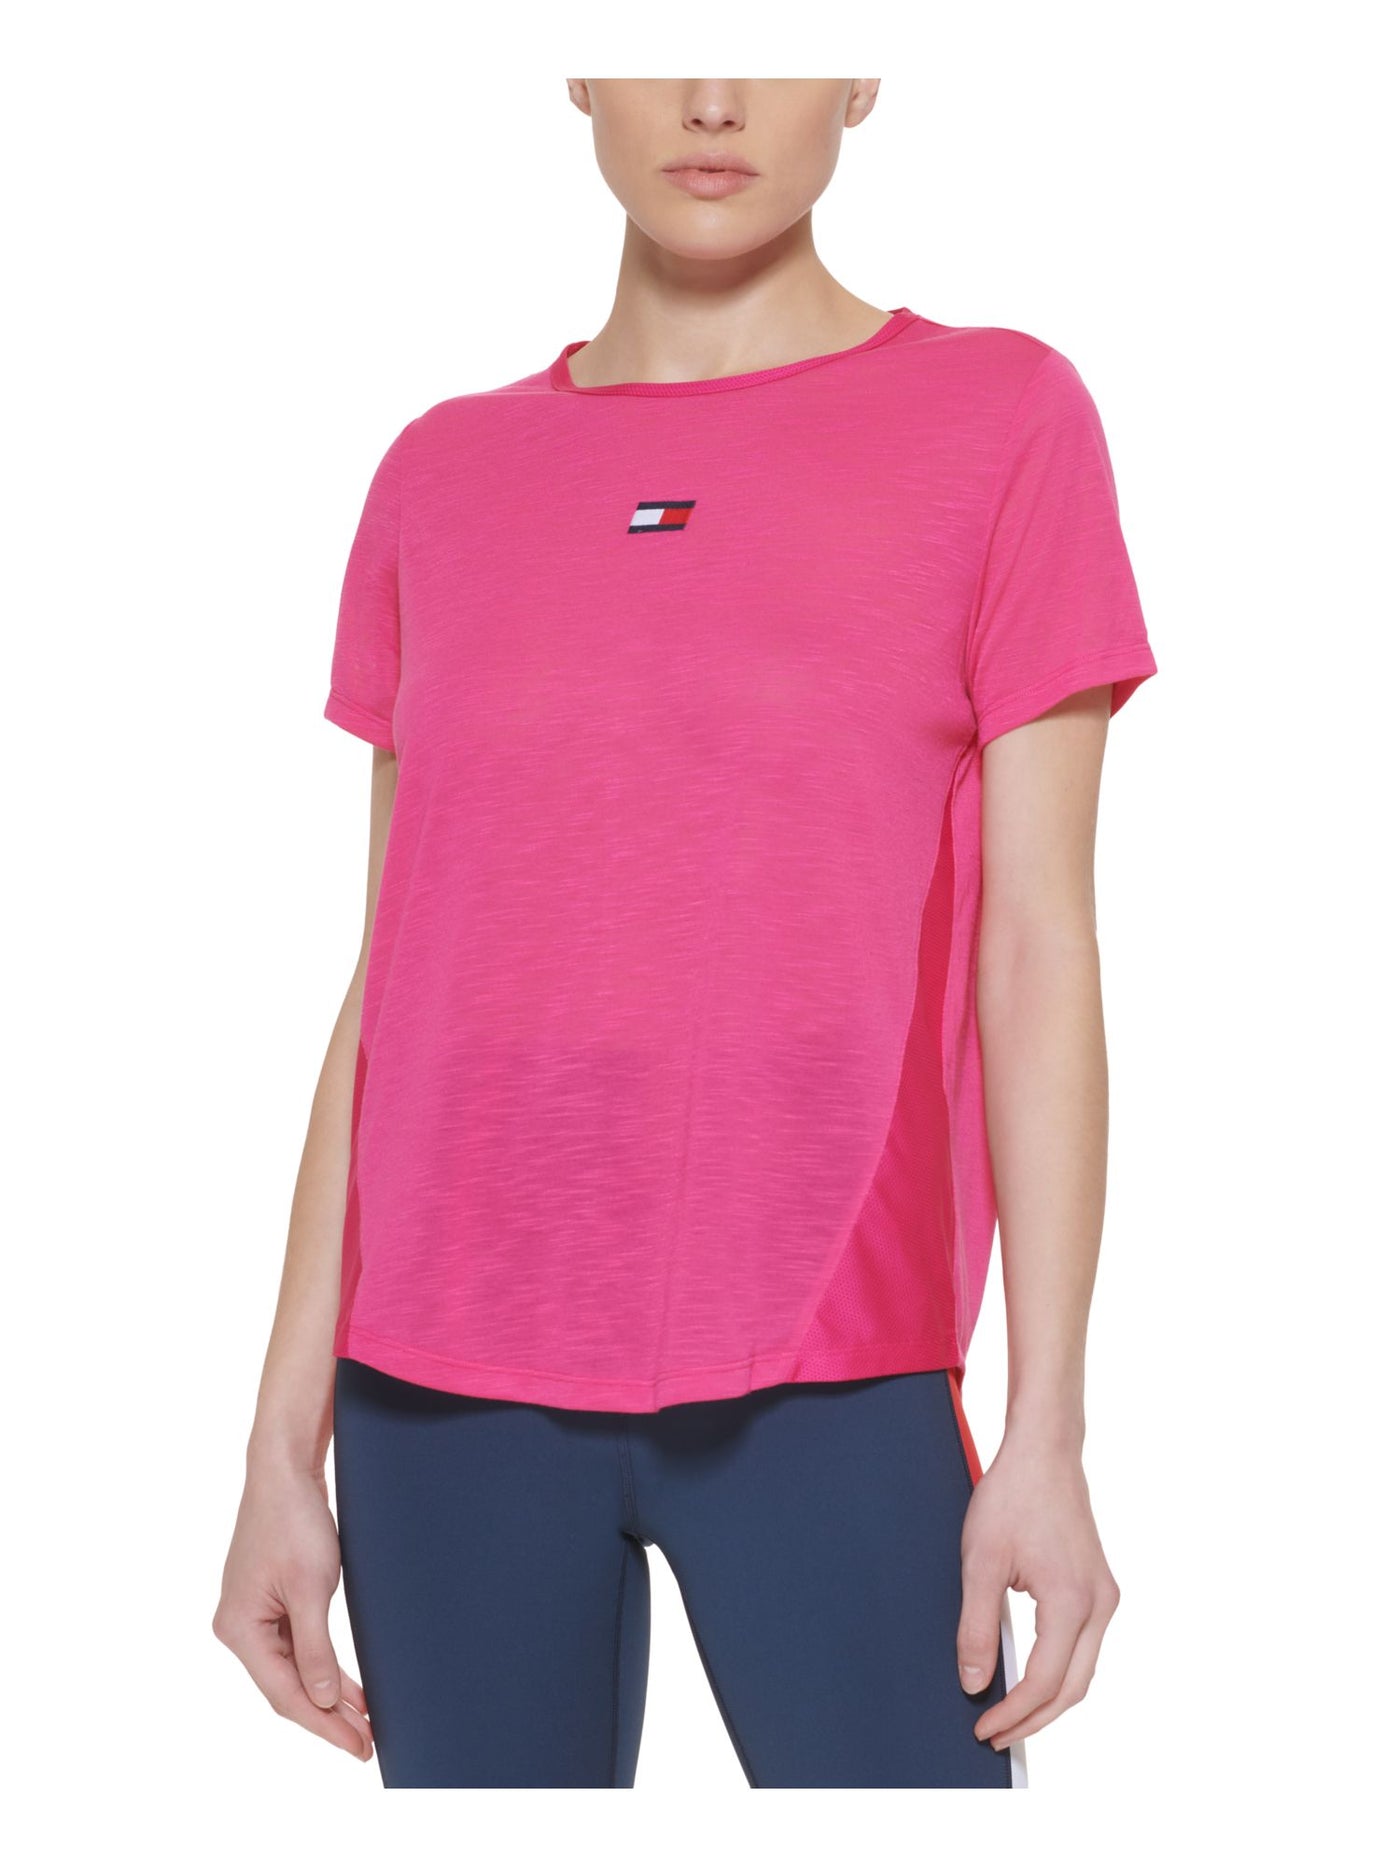 TOMMY HILFIGER SPORT Womens Pink Sheer Fitness Mesh Side Insets Heather Short Sleeve Crew Neck Active Wear T-Shirt XS